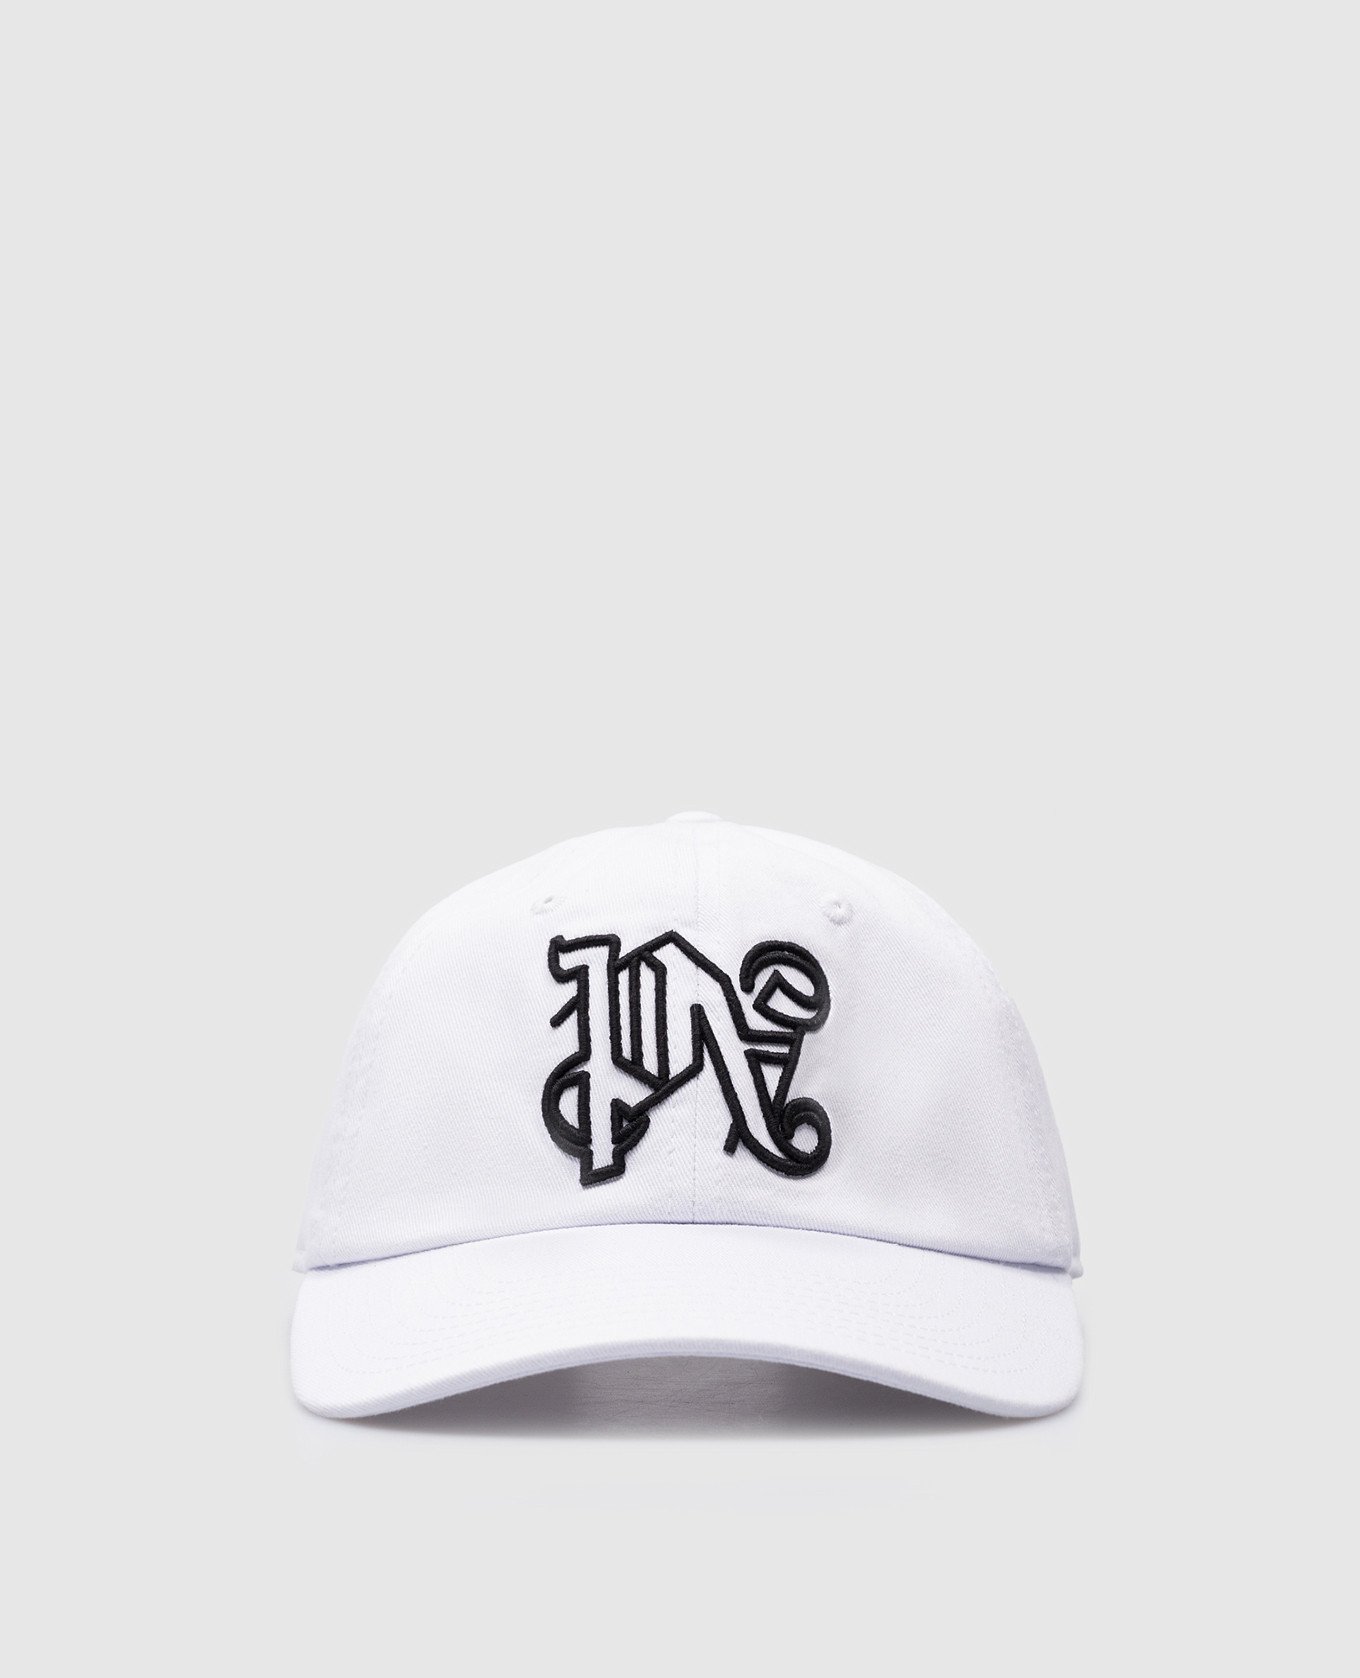 White cap with contrasting logo embroidery